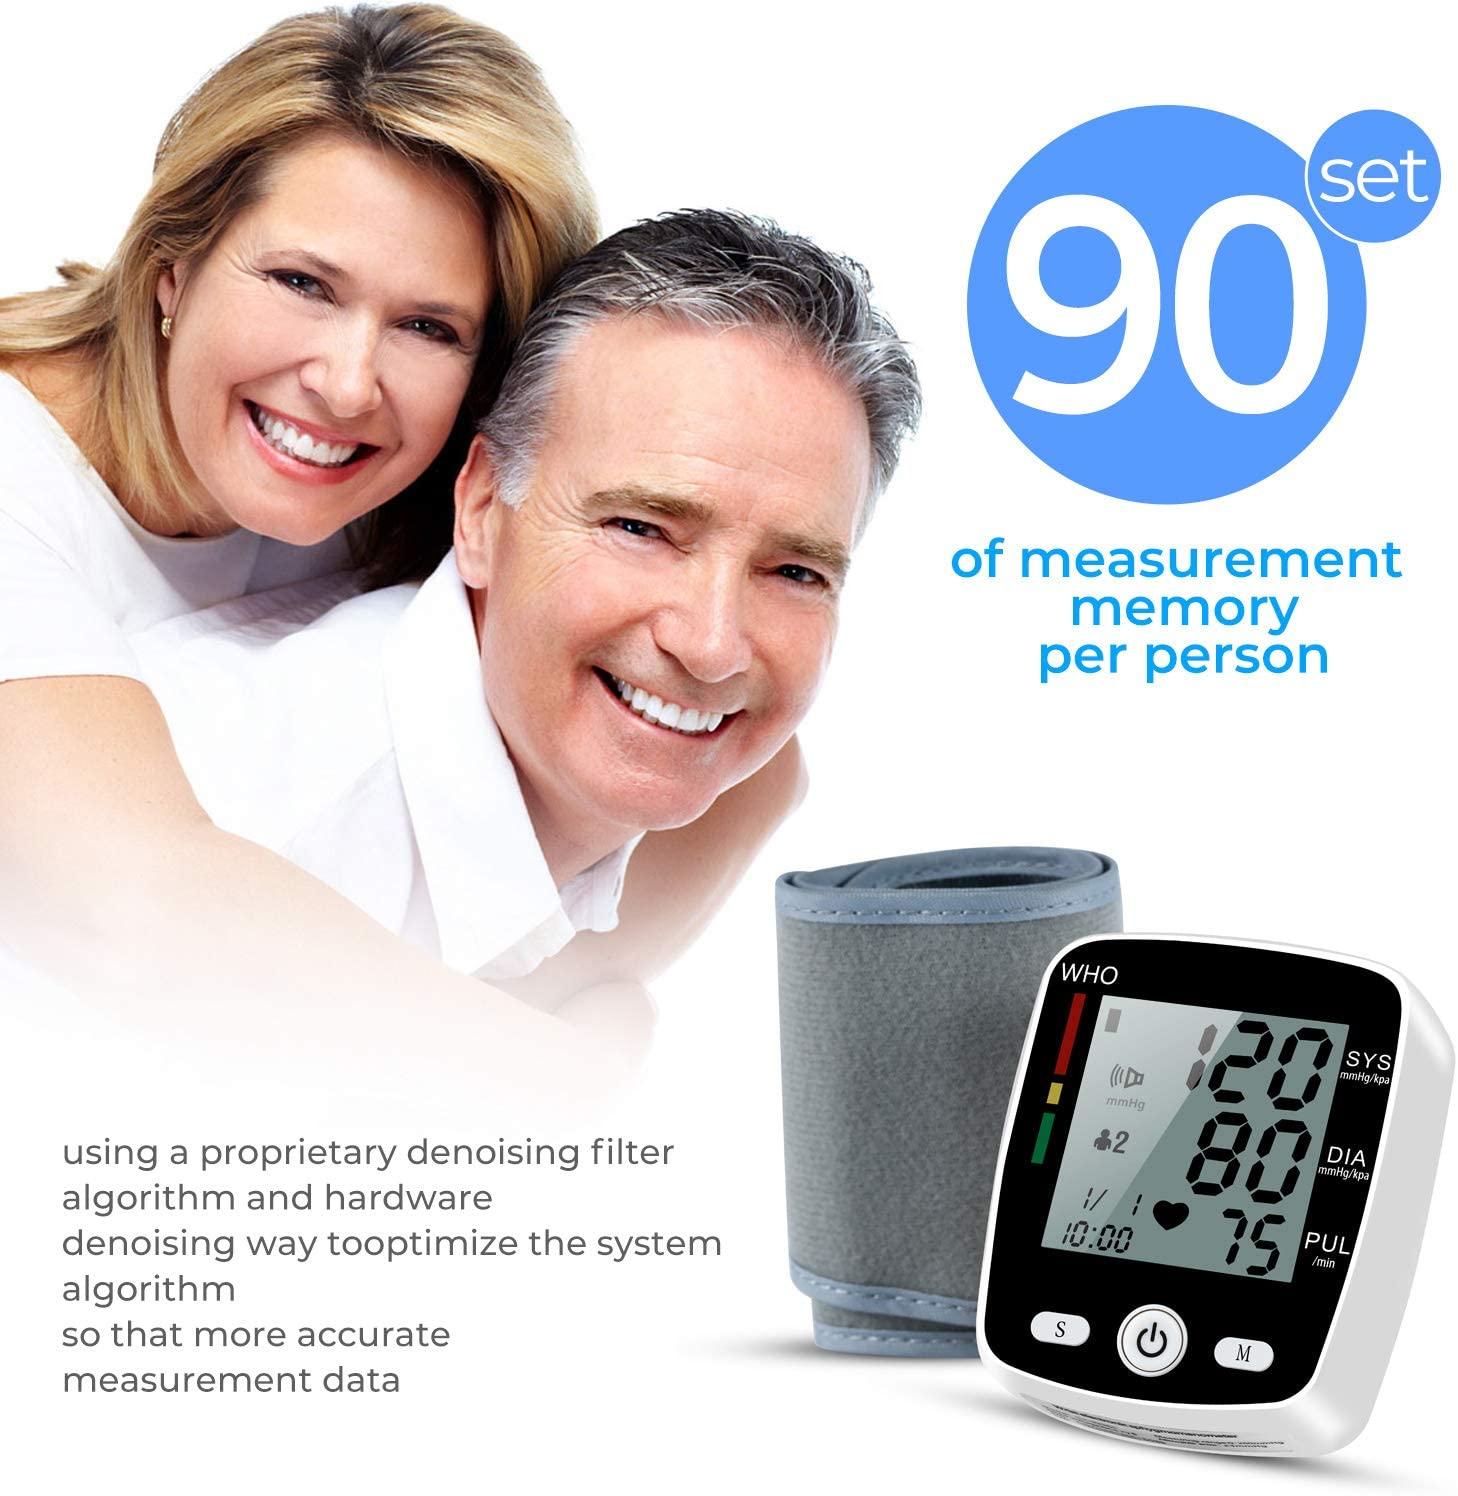 Rechargeable Wrist Blood Pressure Monitor